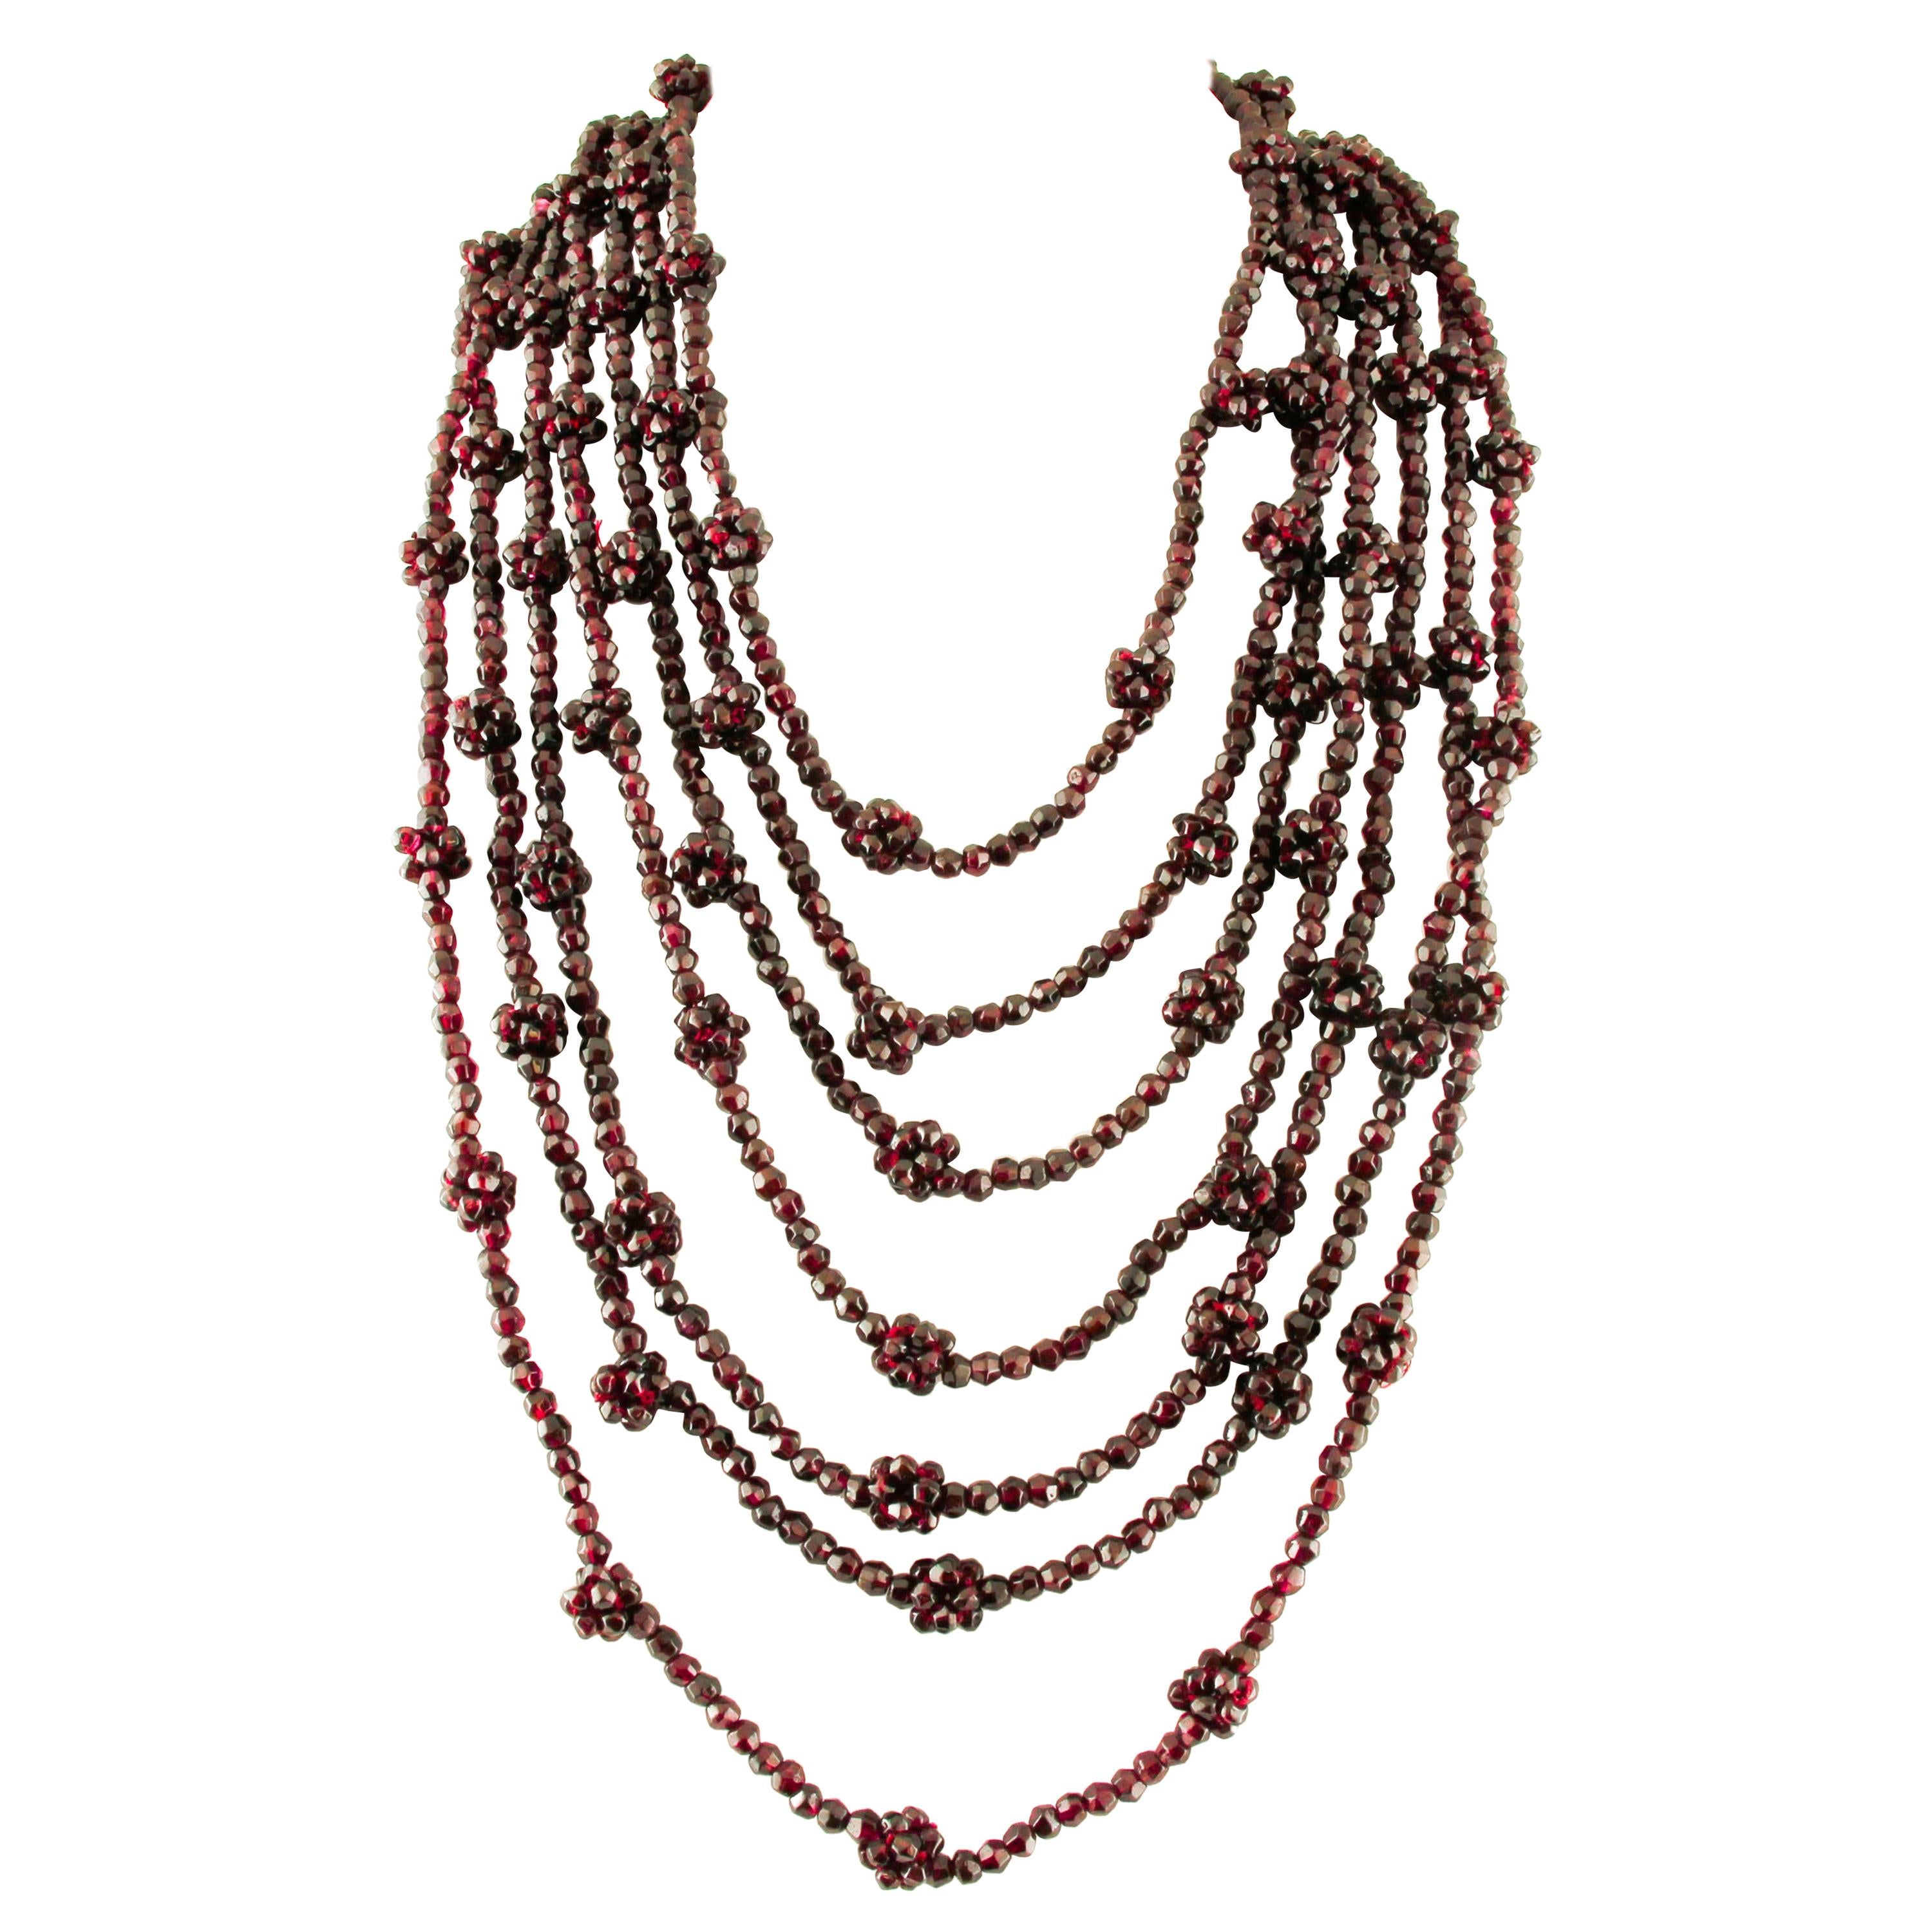 Multi-Strands Garnets Beaded Necklace with Golden Silver Clasp